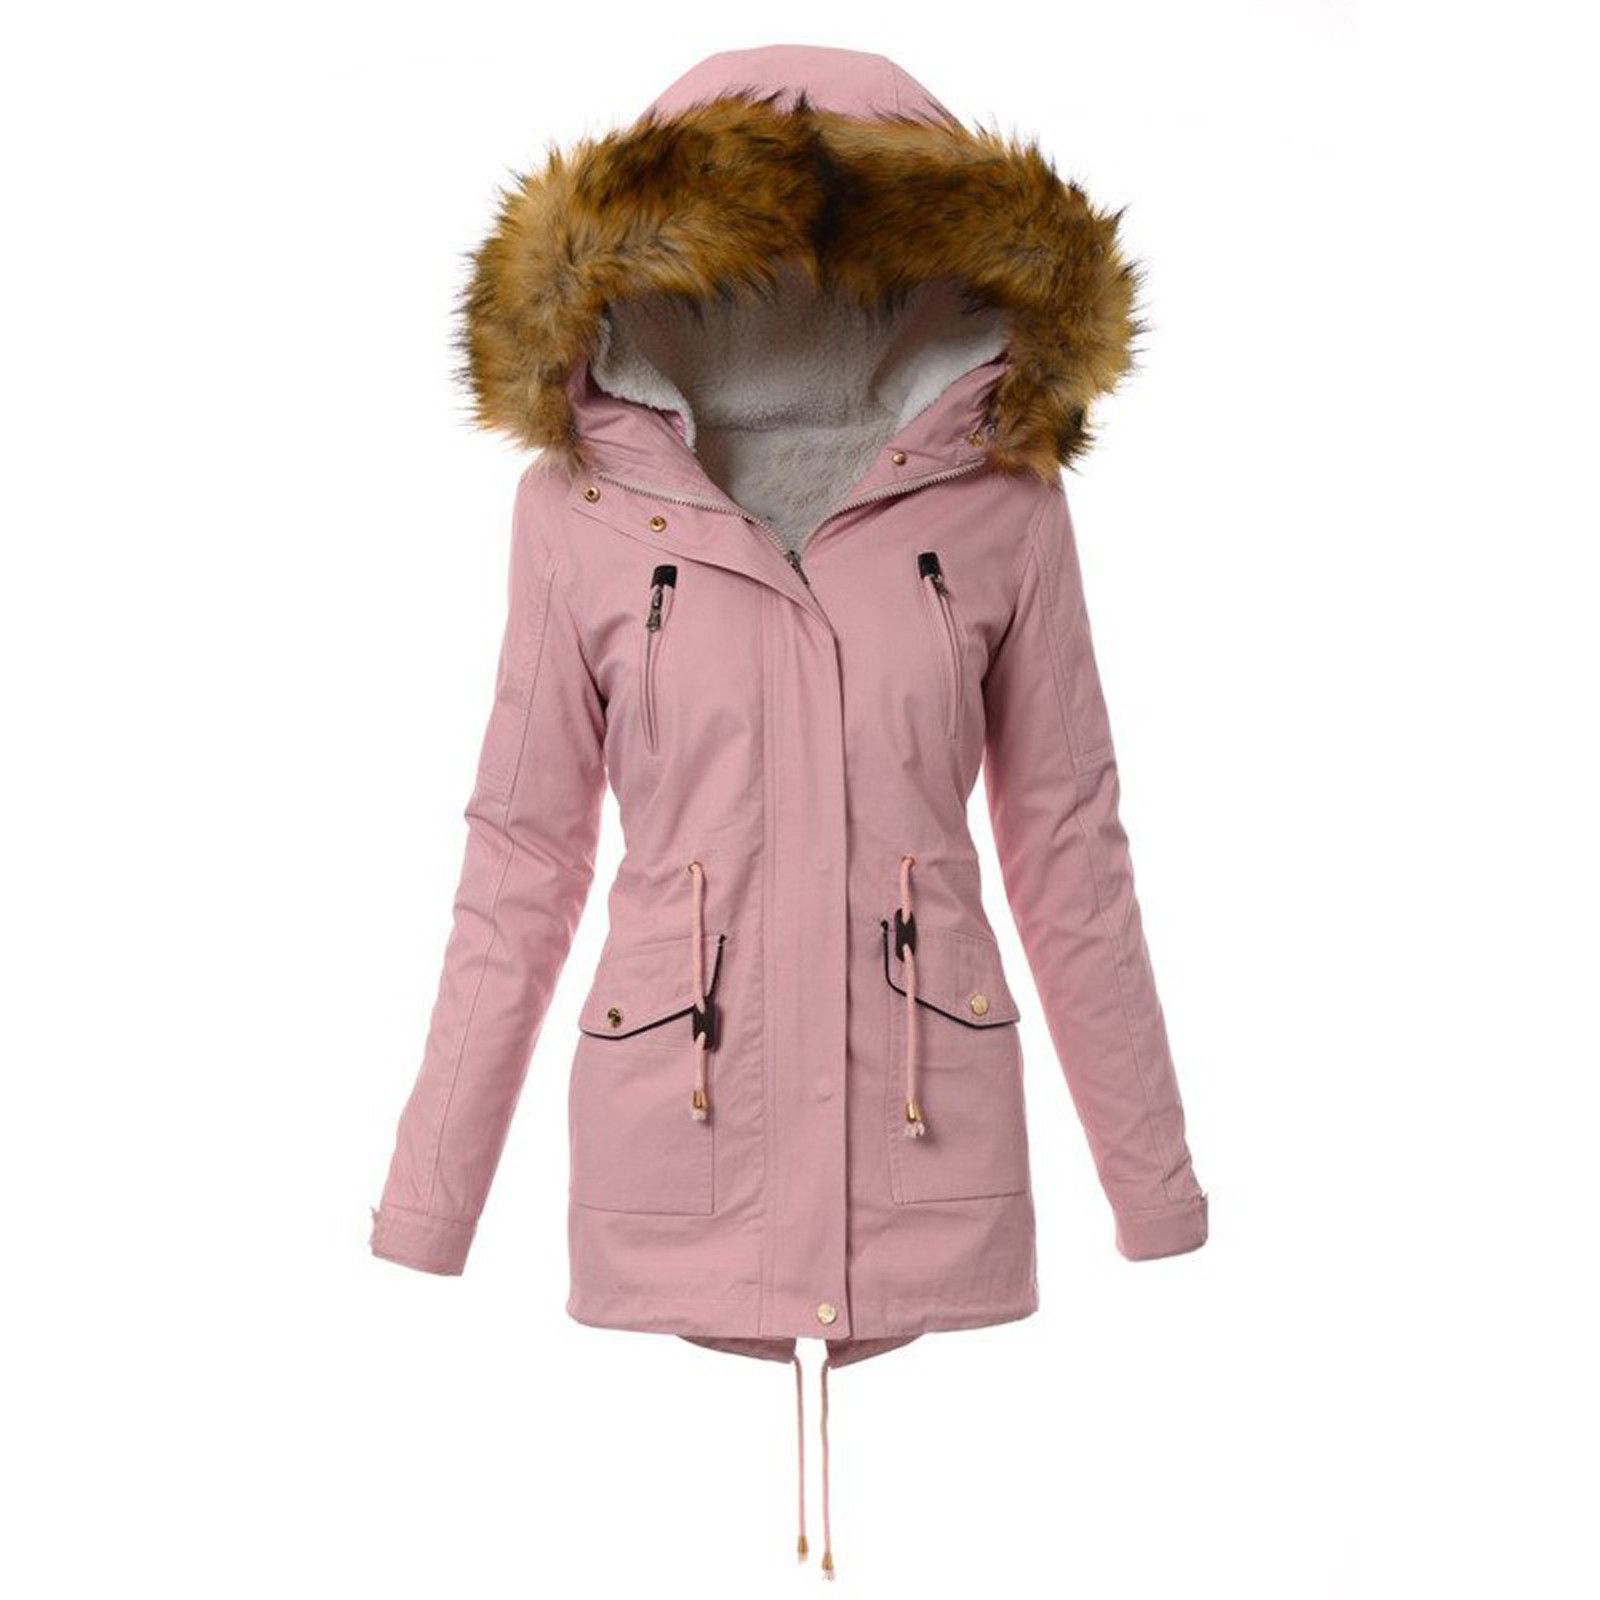 Lanhui Women's Warm Coat Jacket Outwear Fur' Lined Trench Winter Hooded Thick Overcoat - image 2 of 5